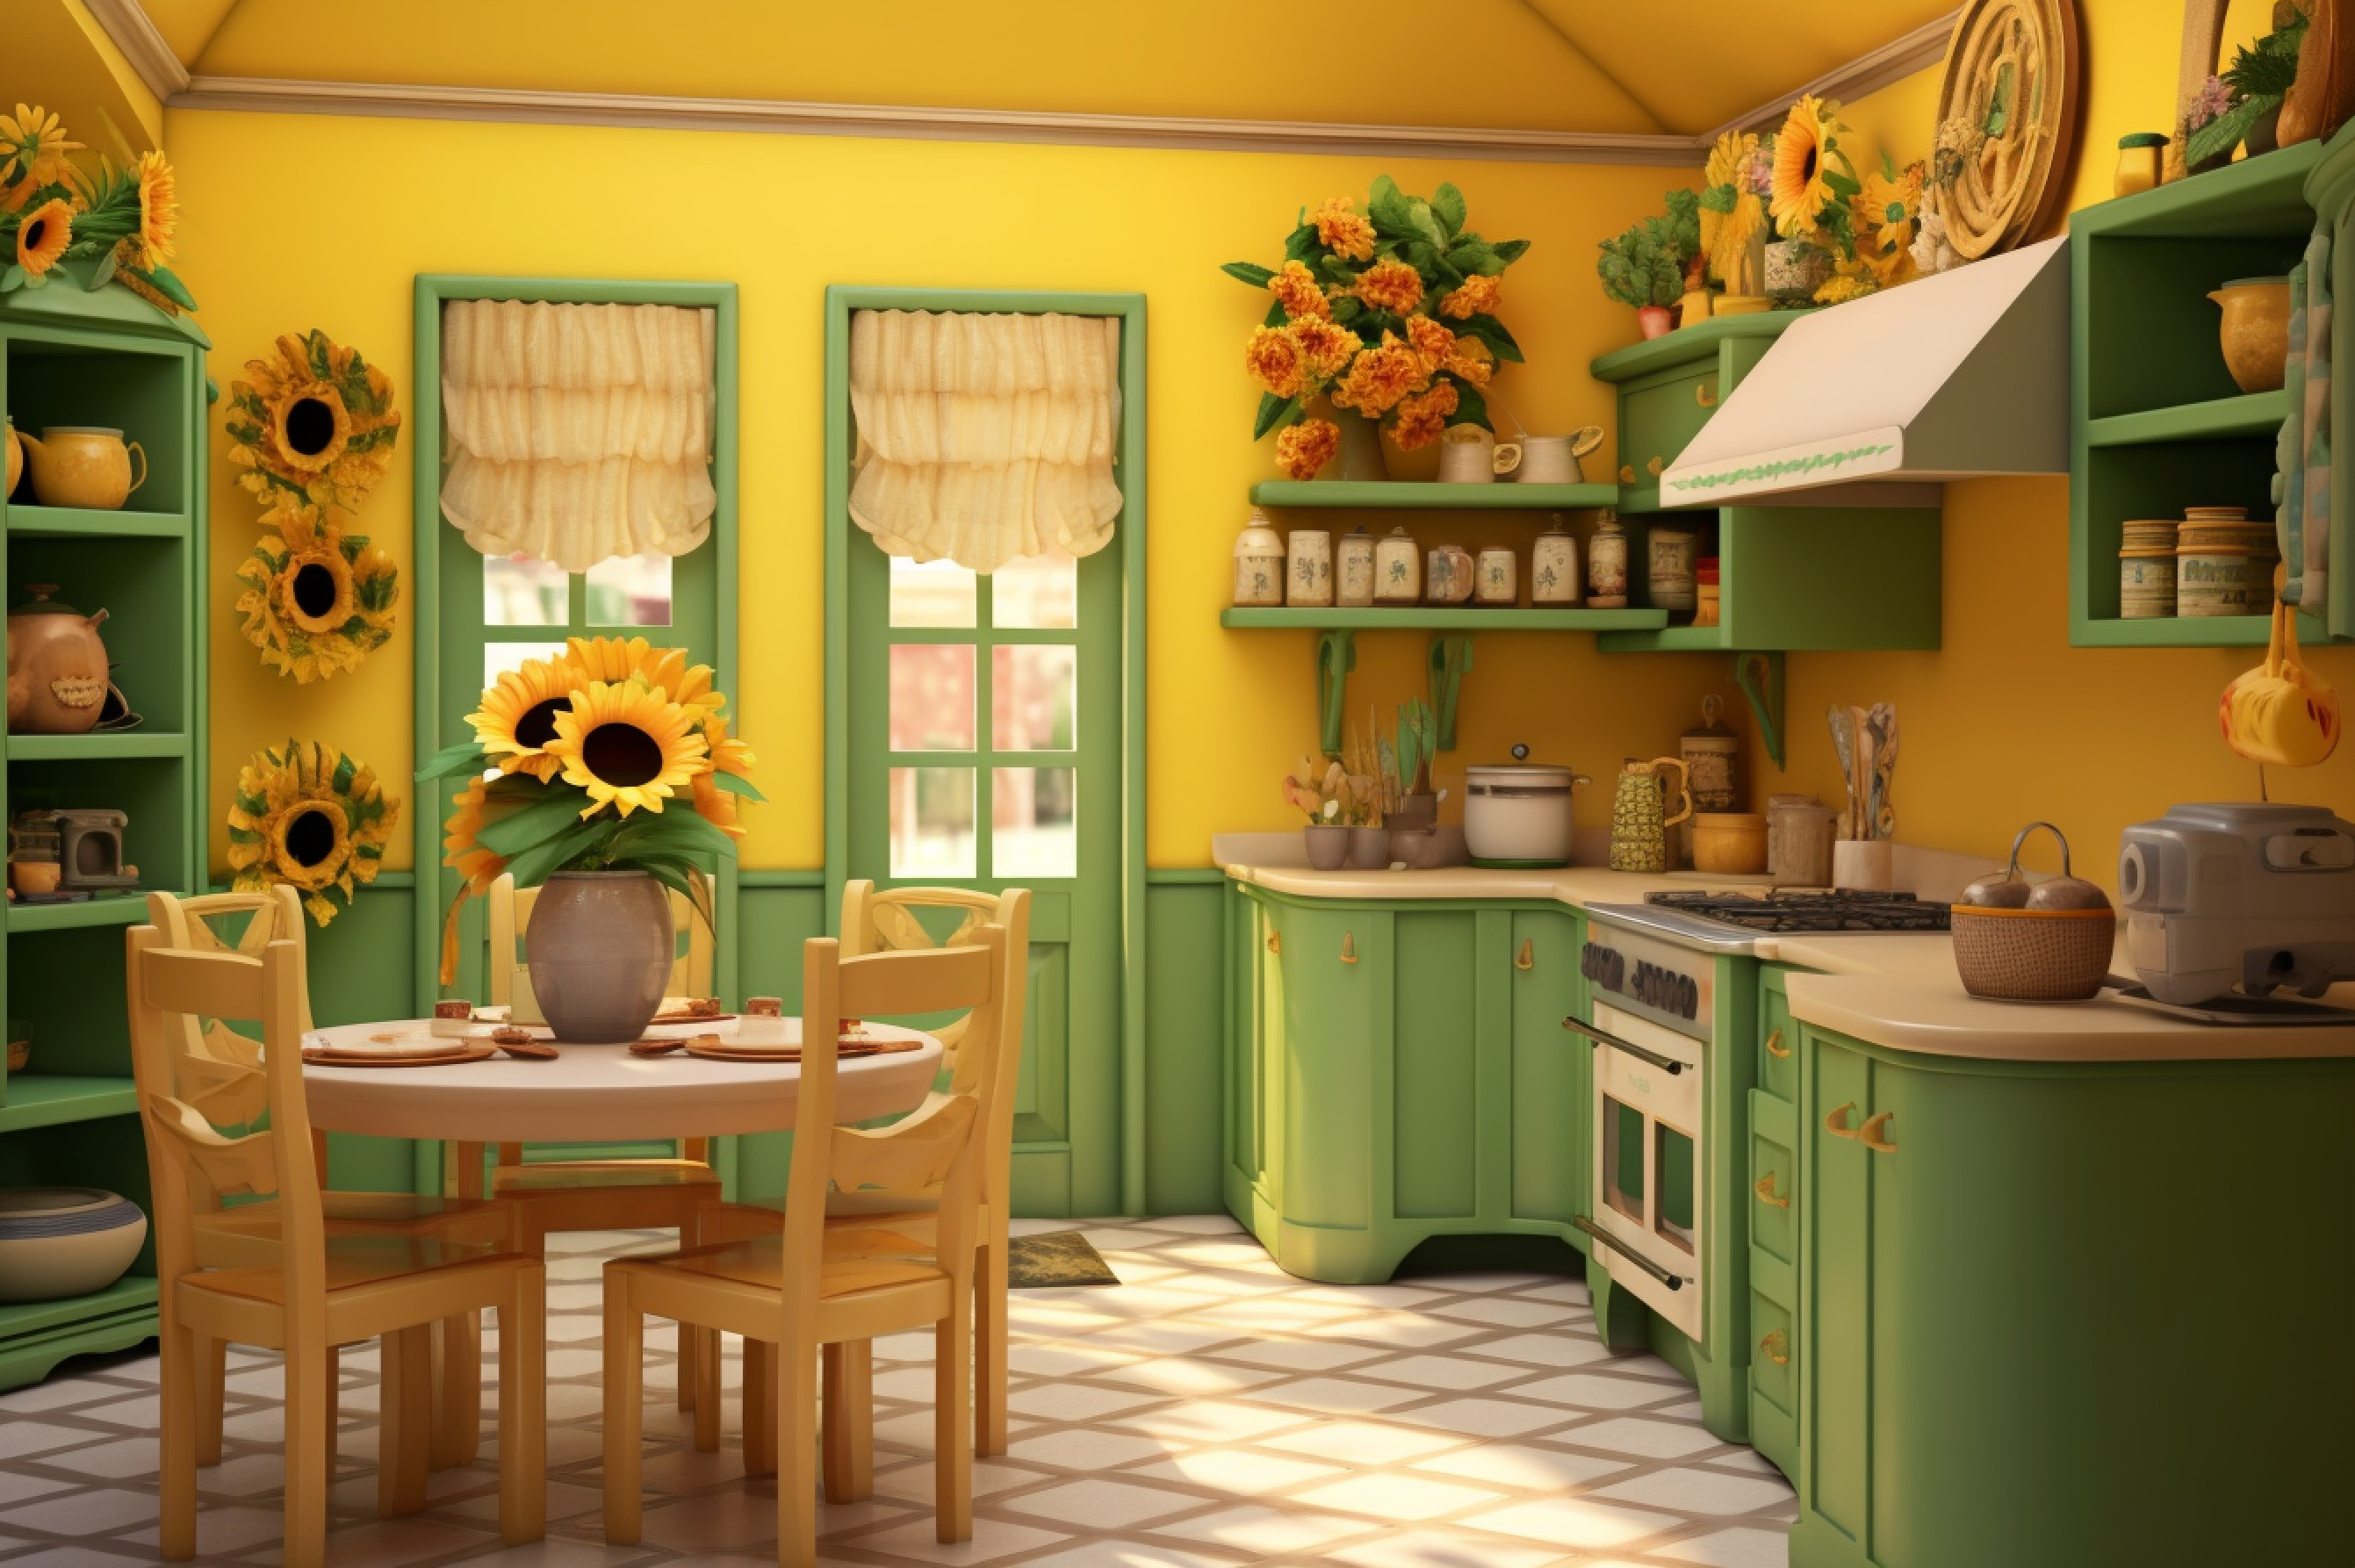 21. Sunshine Yellow and Vibrant Green Scheme. A kitchen that brings a literal slice of sunshine indoors with its yellow walls and vibrant green accents.